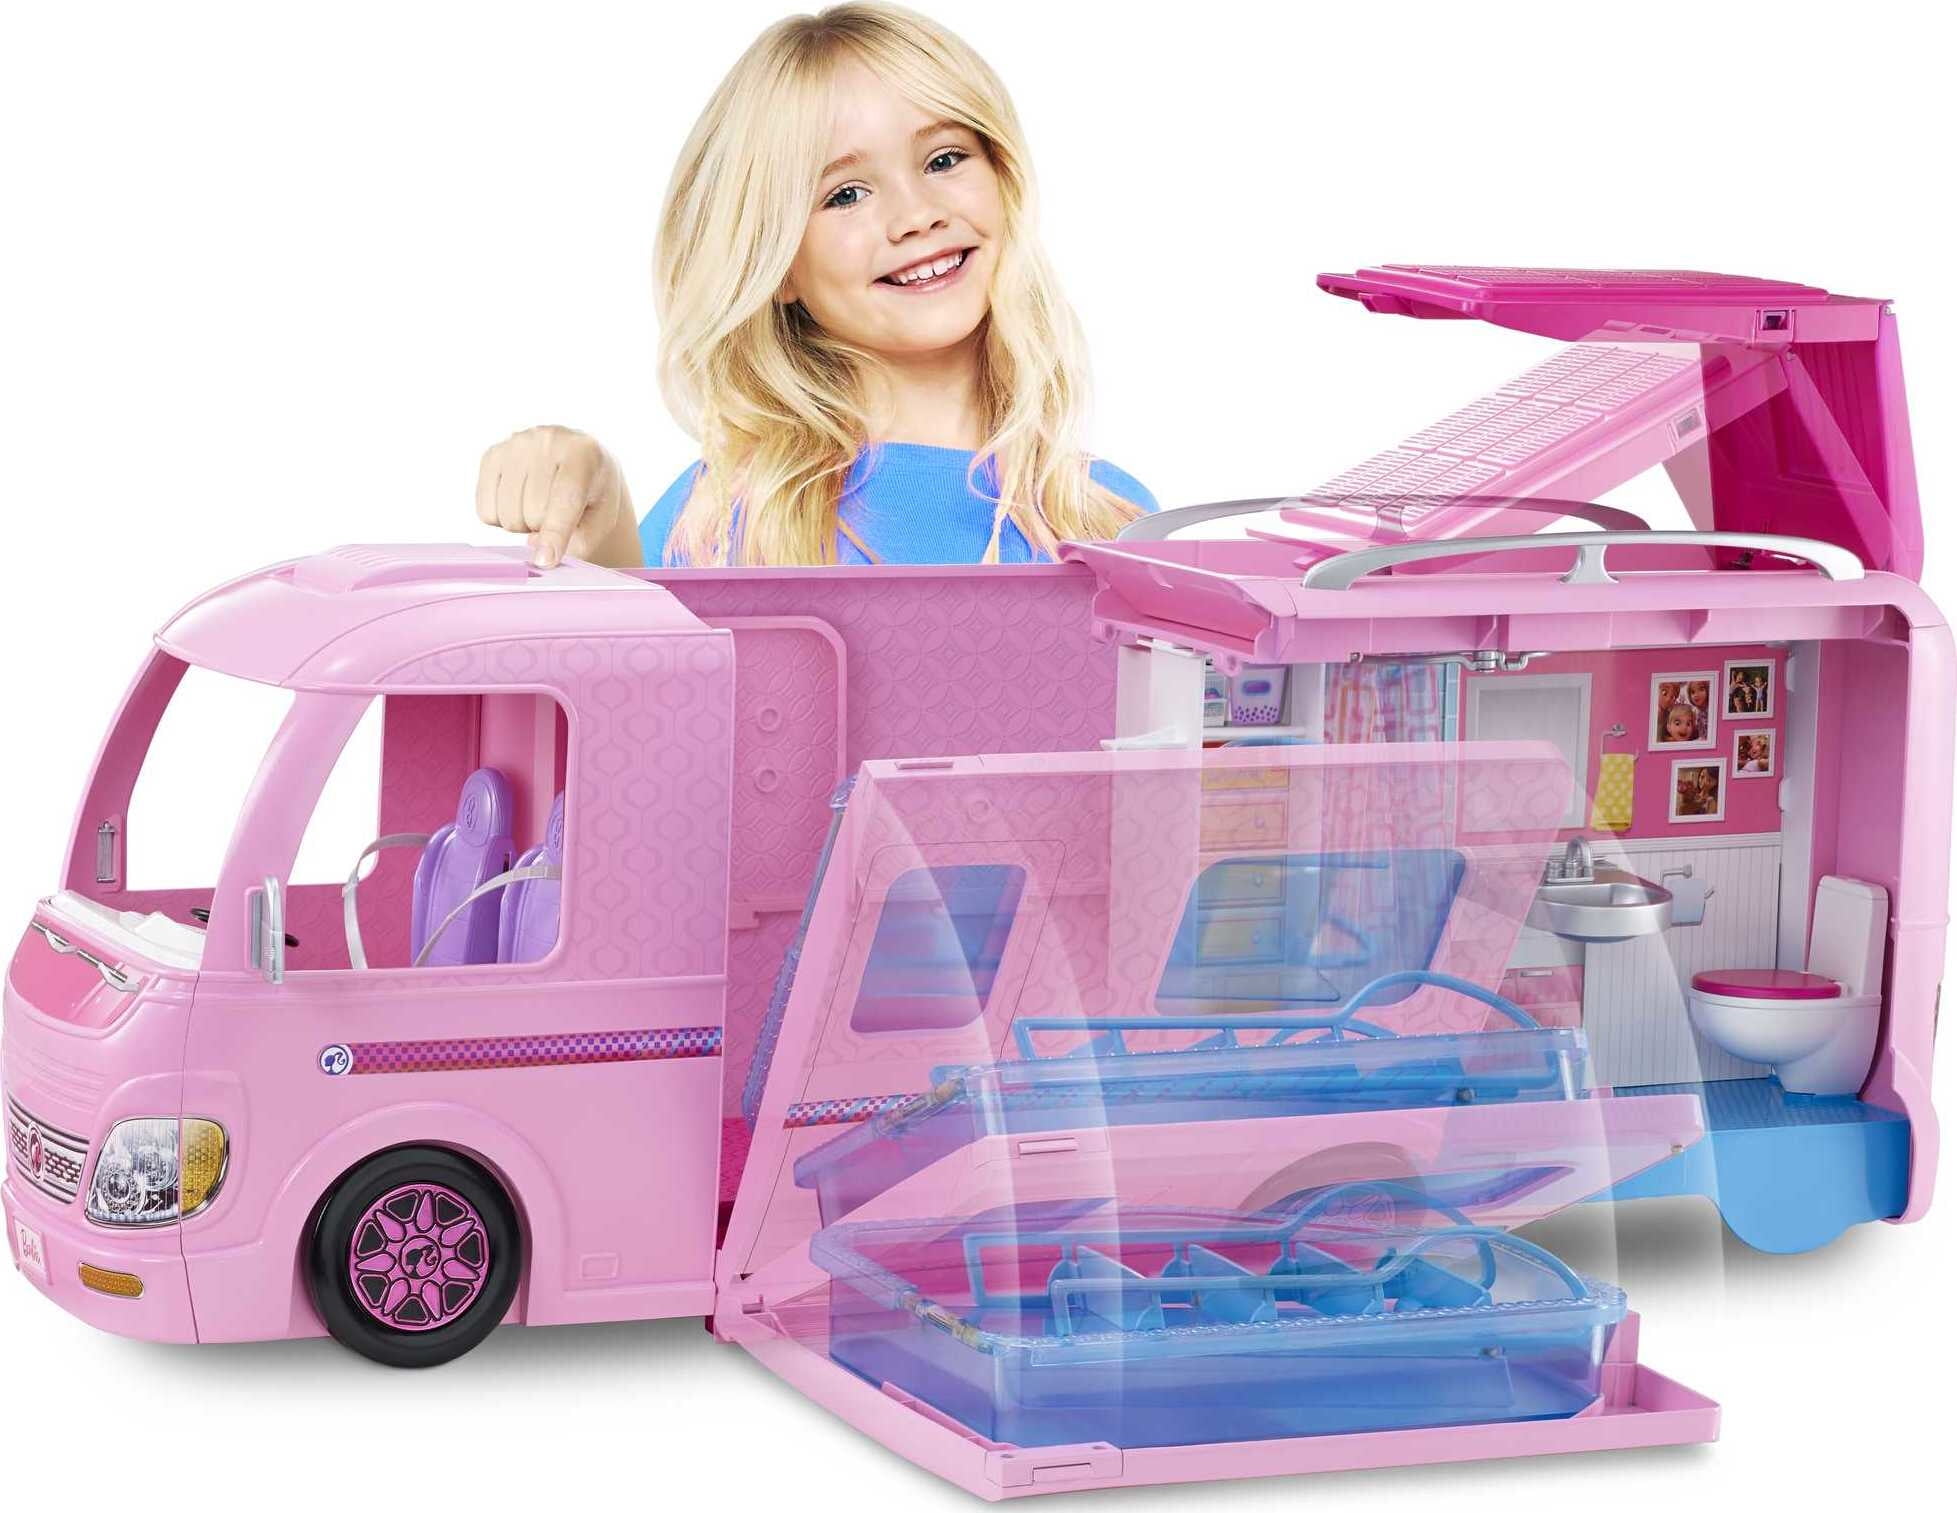 Fisher-Price recalls 44,000 Barbie Dream Camper cars due to injury risks  from faulty pedal